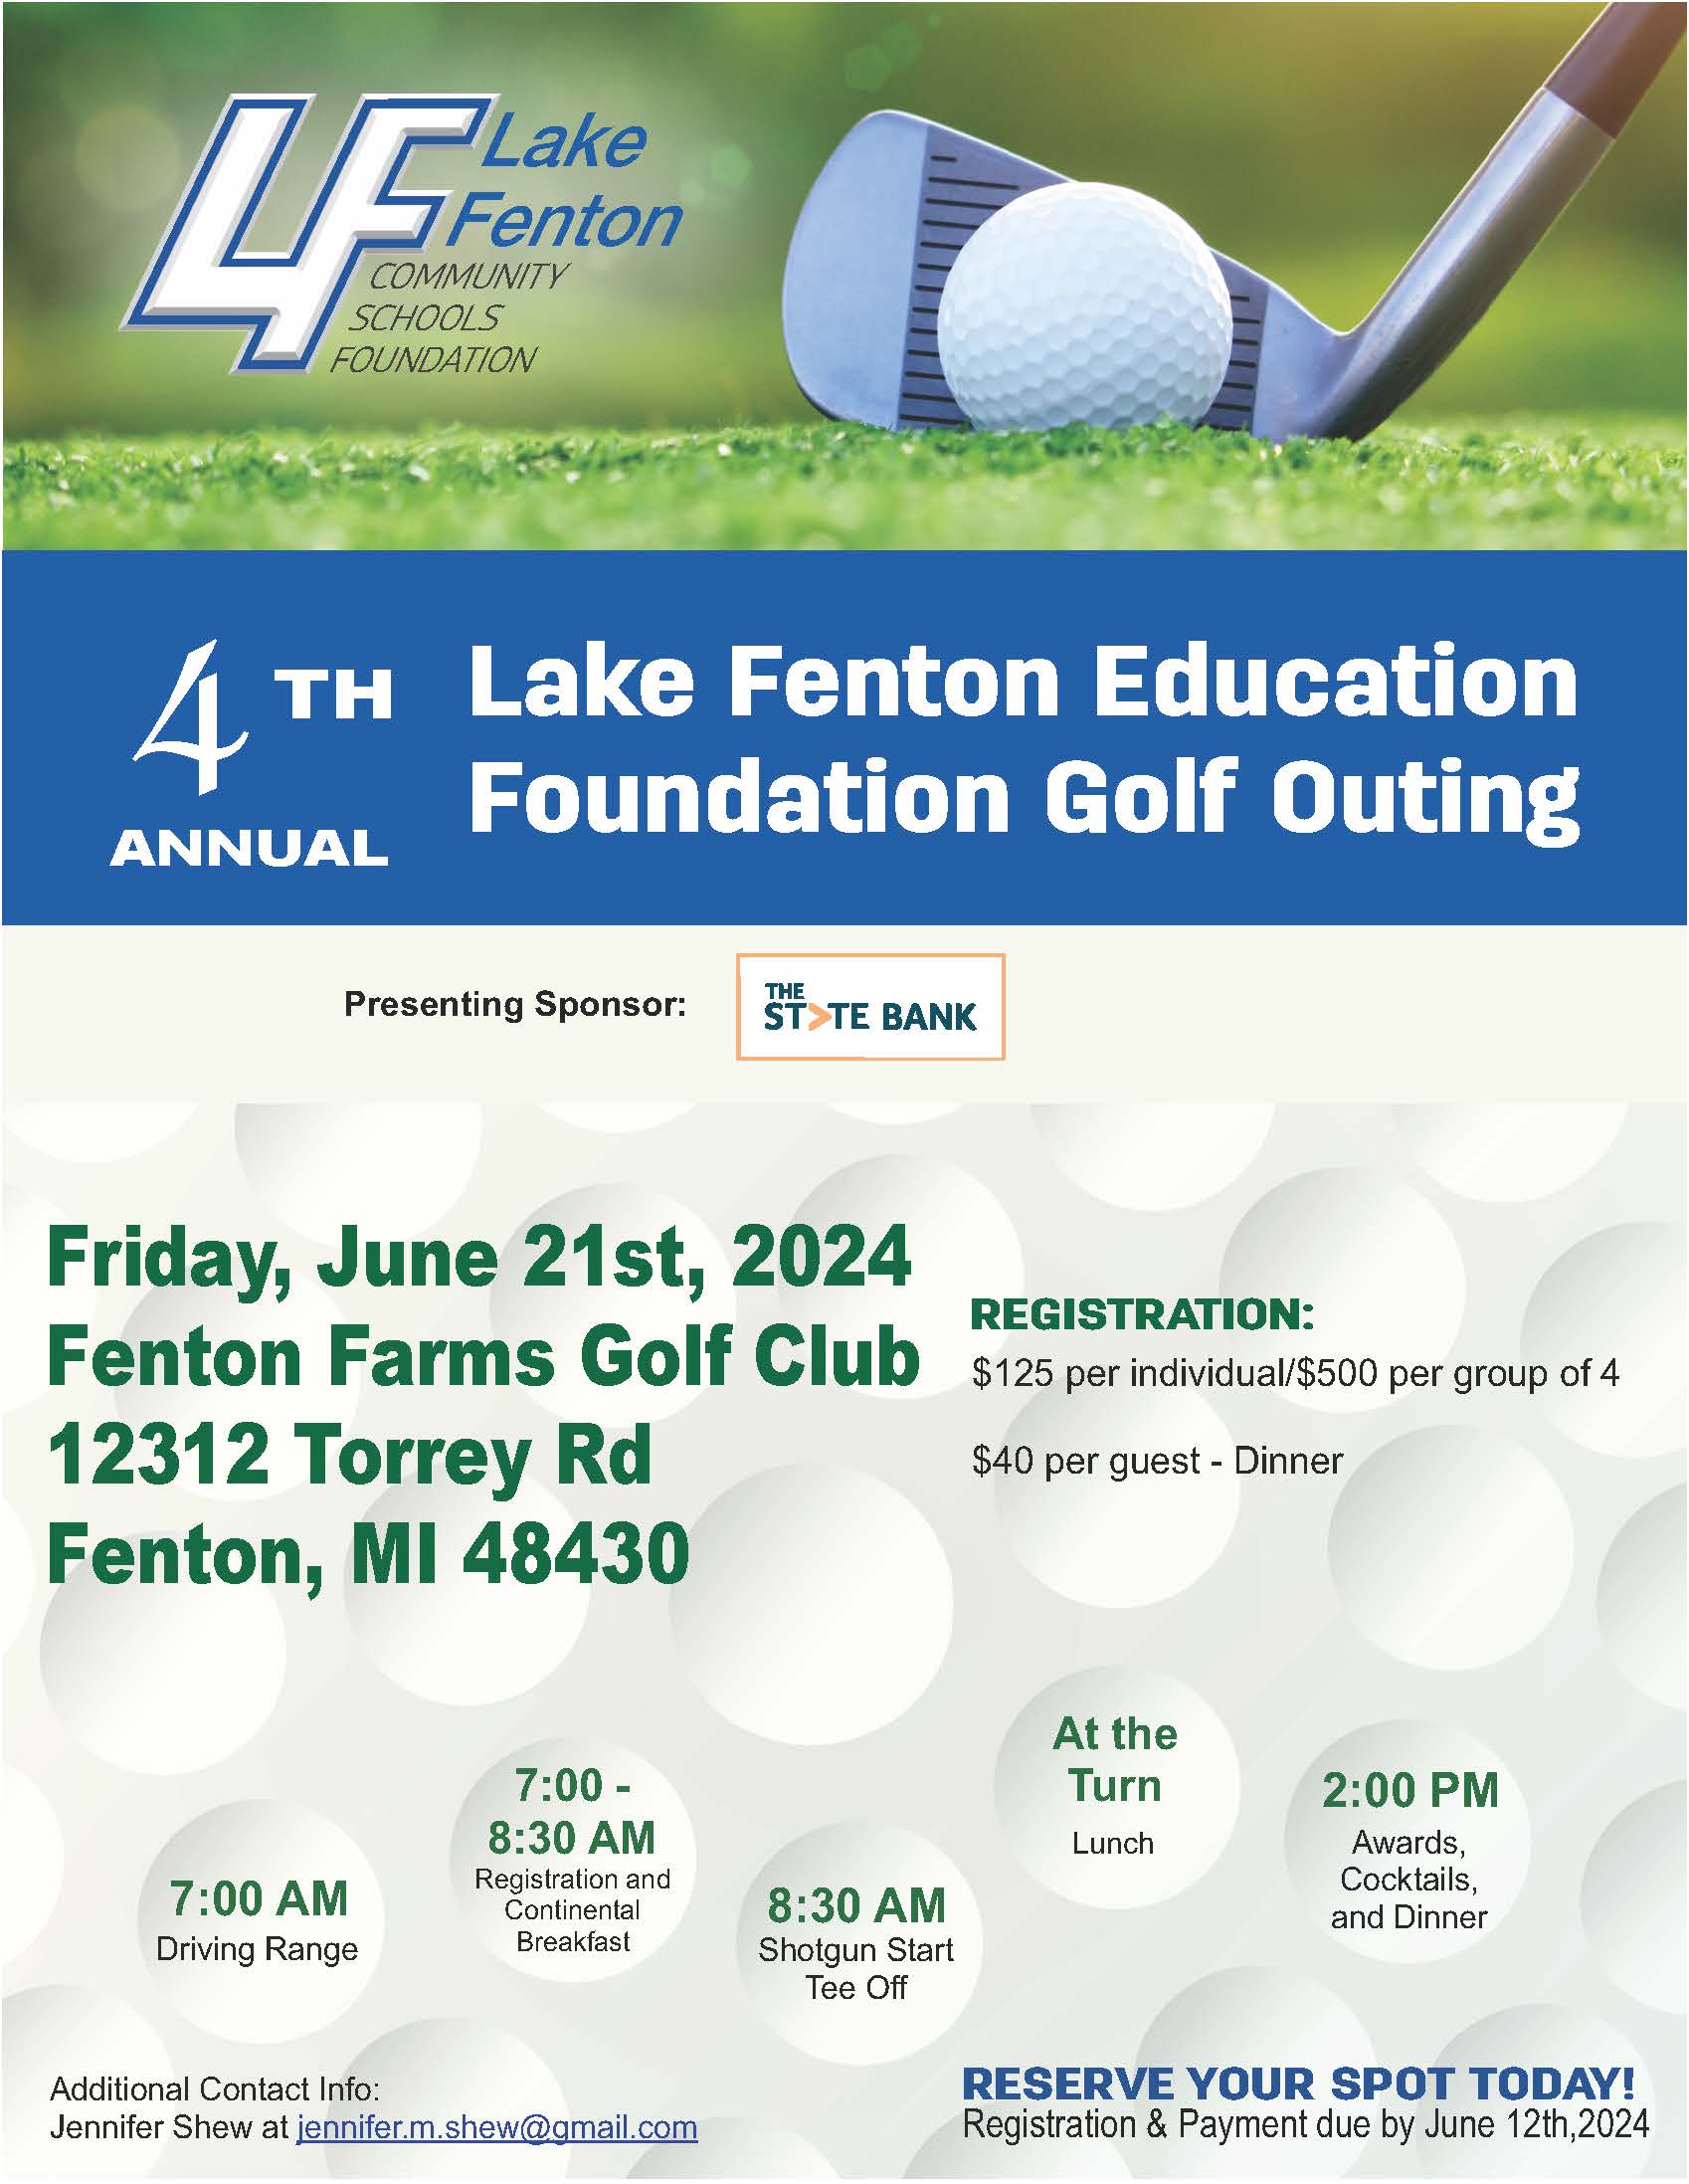 LF Education Foundation Annual Golf Outing